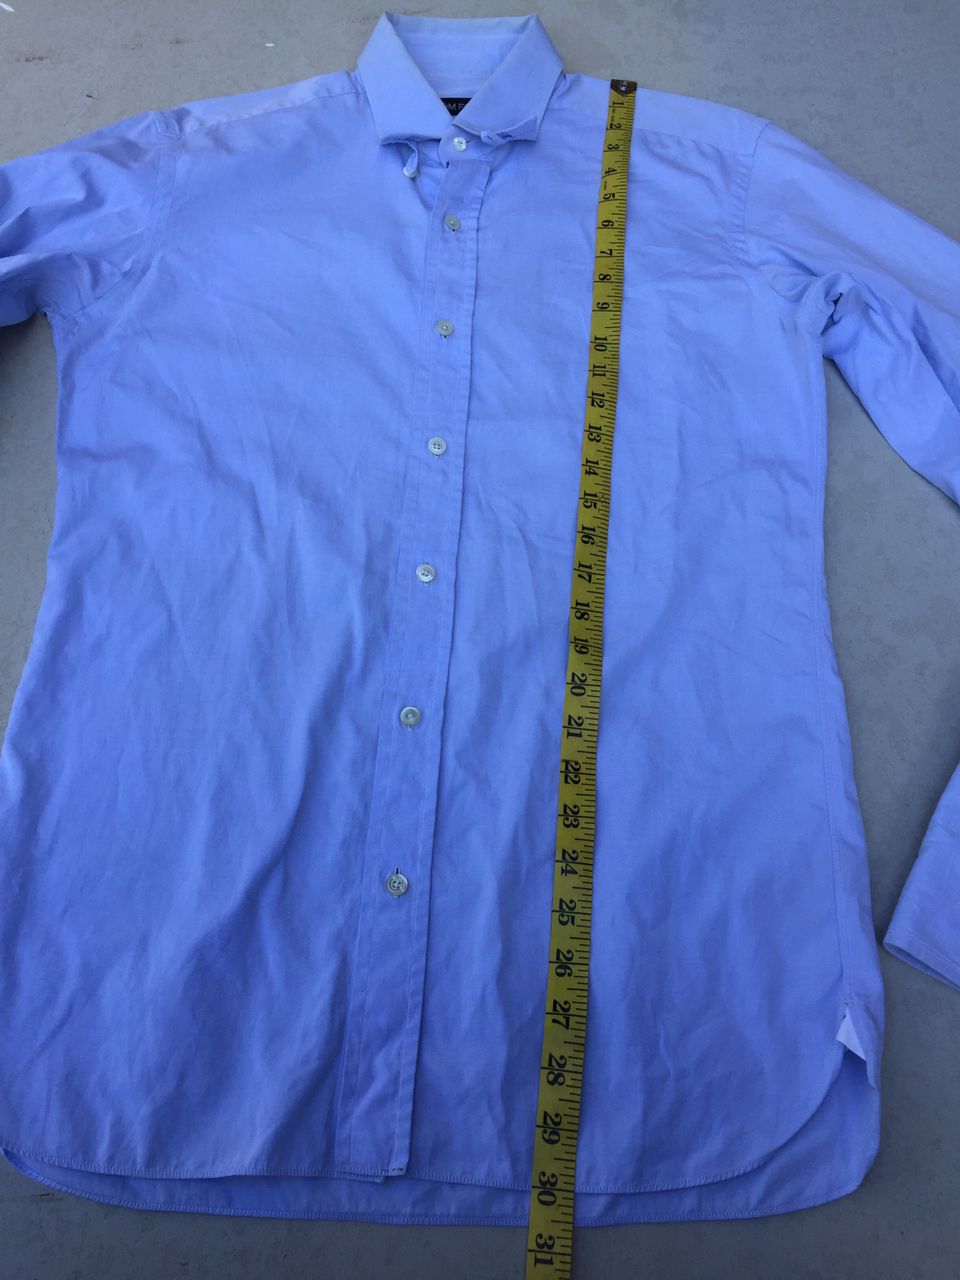 Tom Ford French Cuff button ups shirt - 25